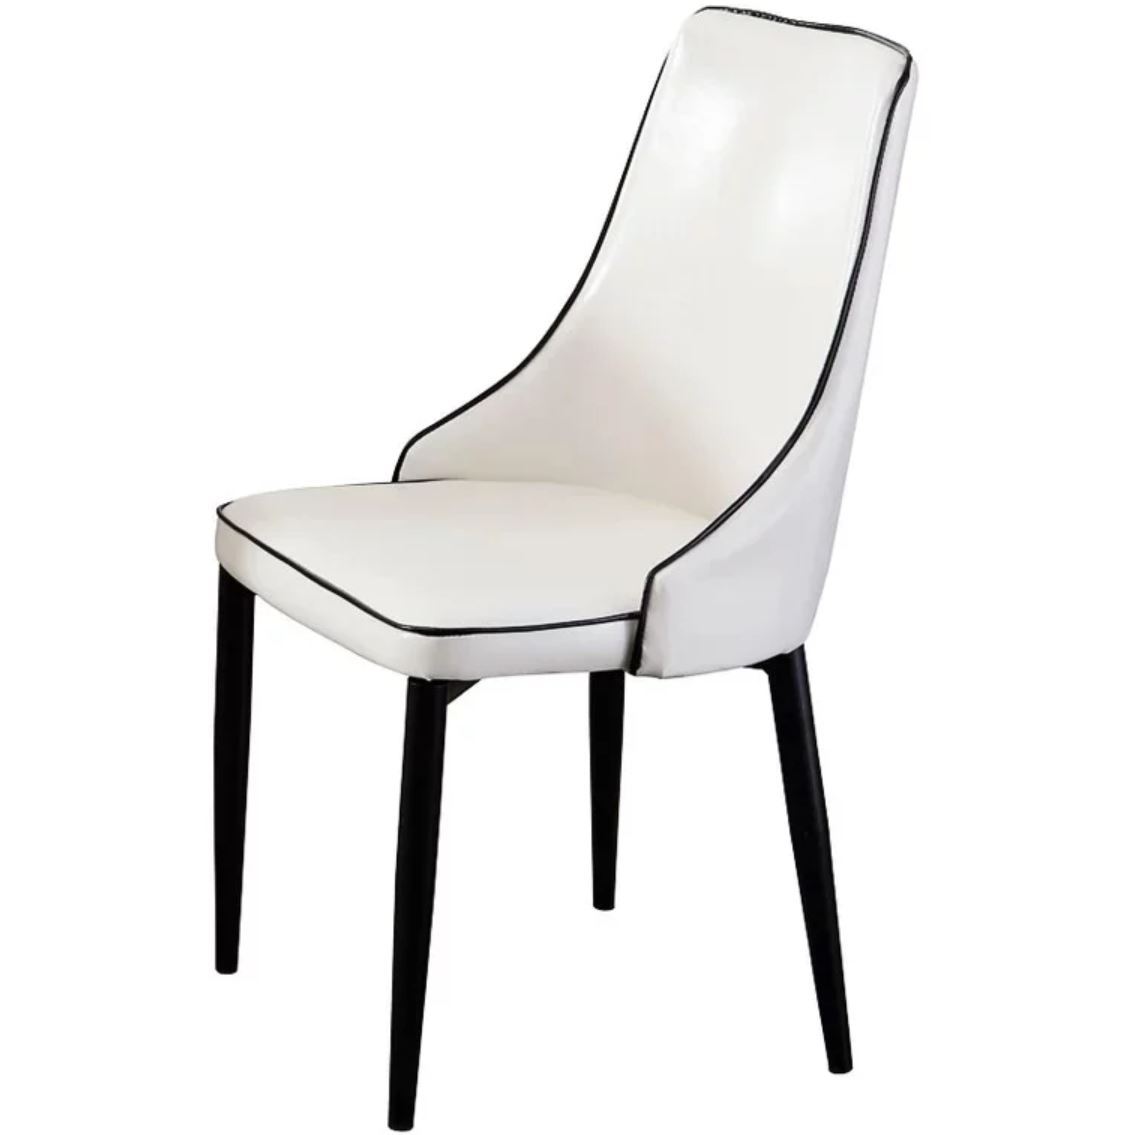 SARA Classic Faux Leather Dining Chair